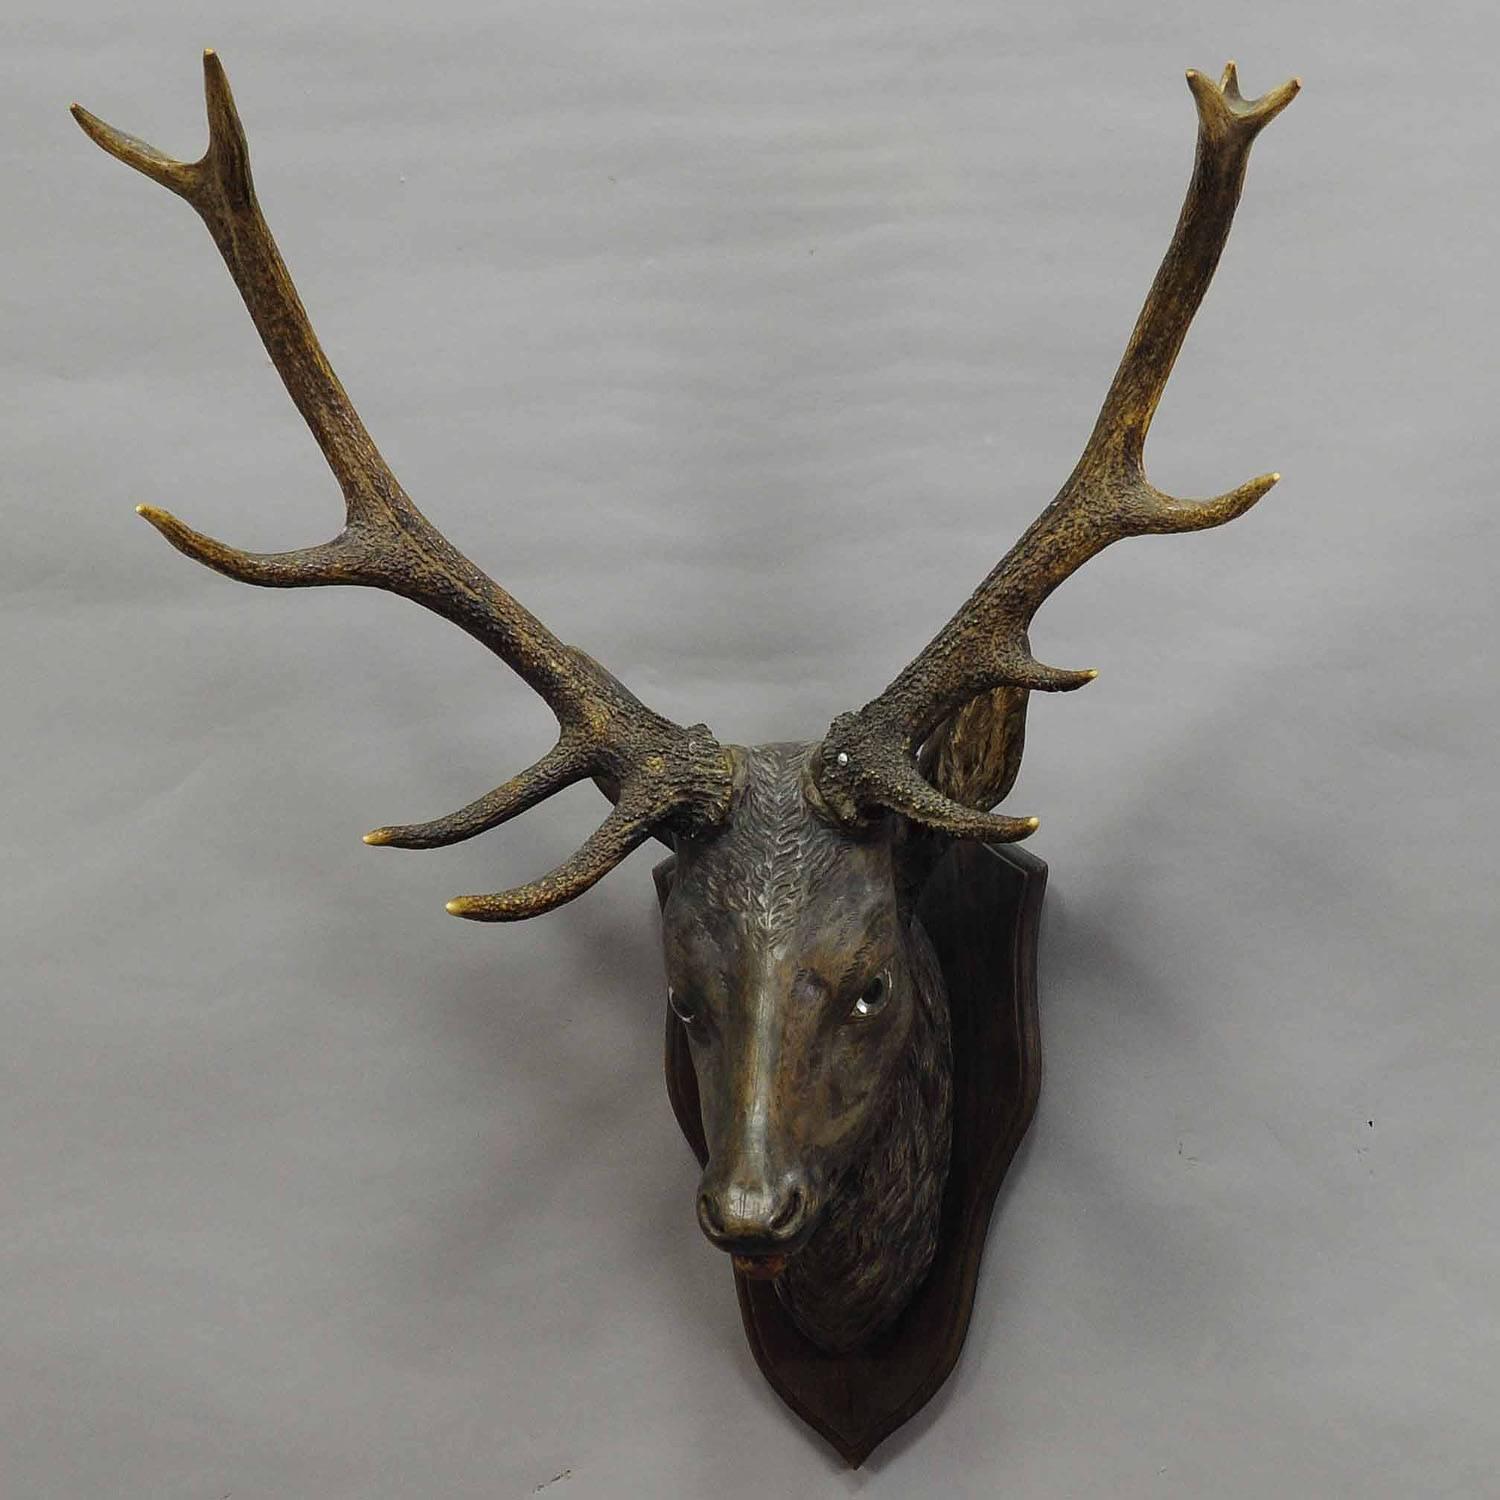 An antique wooden carved Black Forest stag head with real antlers. Carved and painted in naturalistic style, mounted on a wooden plaque, with glass eyes, Germany, circa 1900.